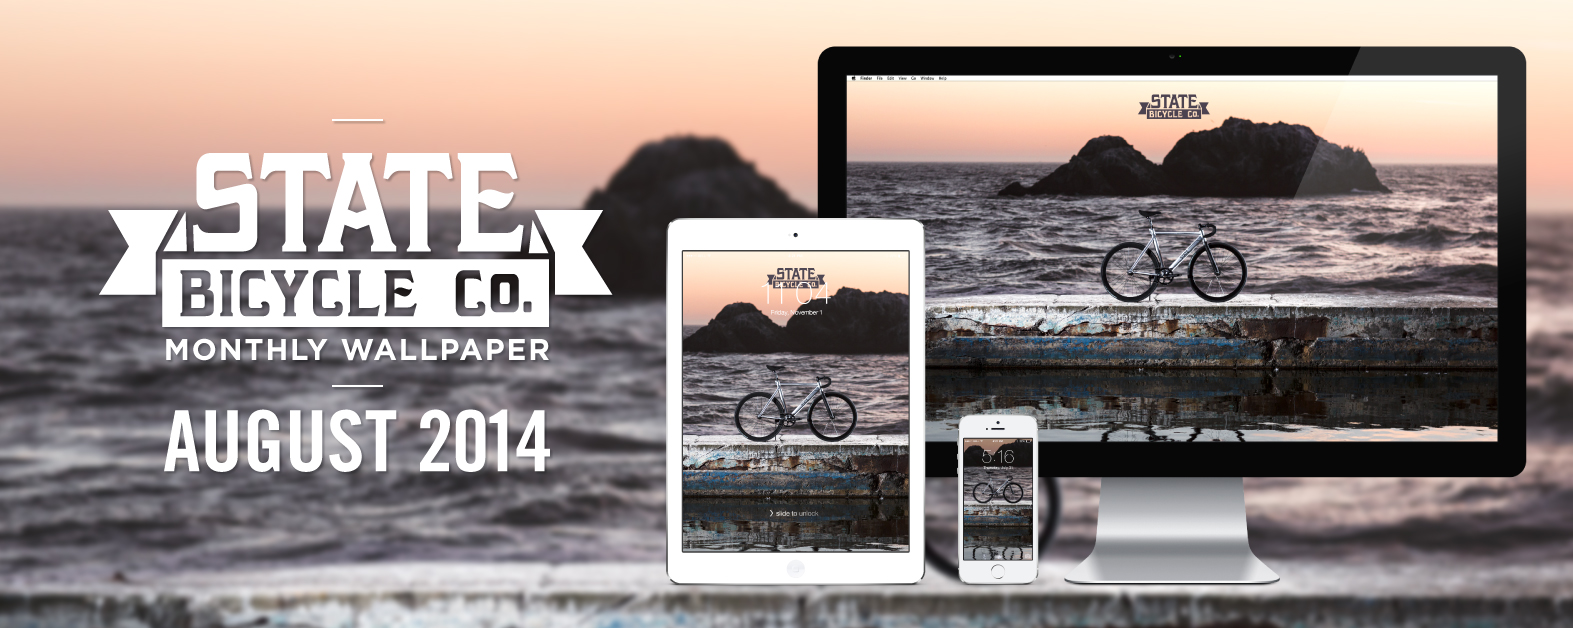 Every month new Fixed Gear Wallpaper - Fixed Gear Europe